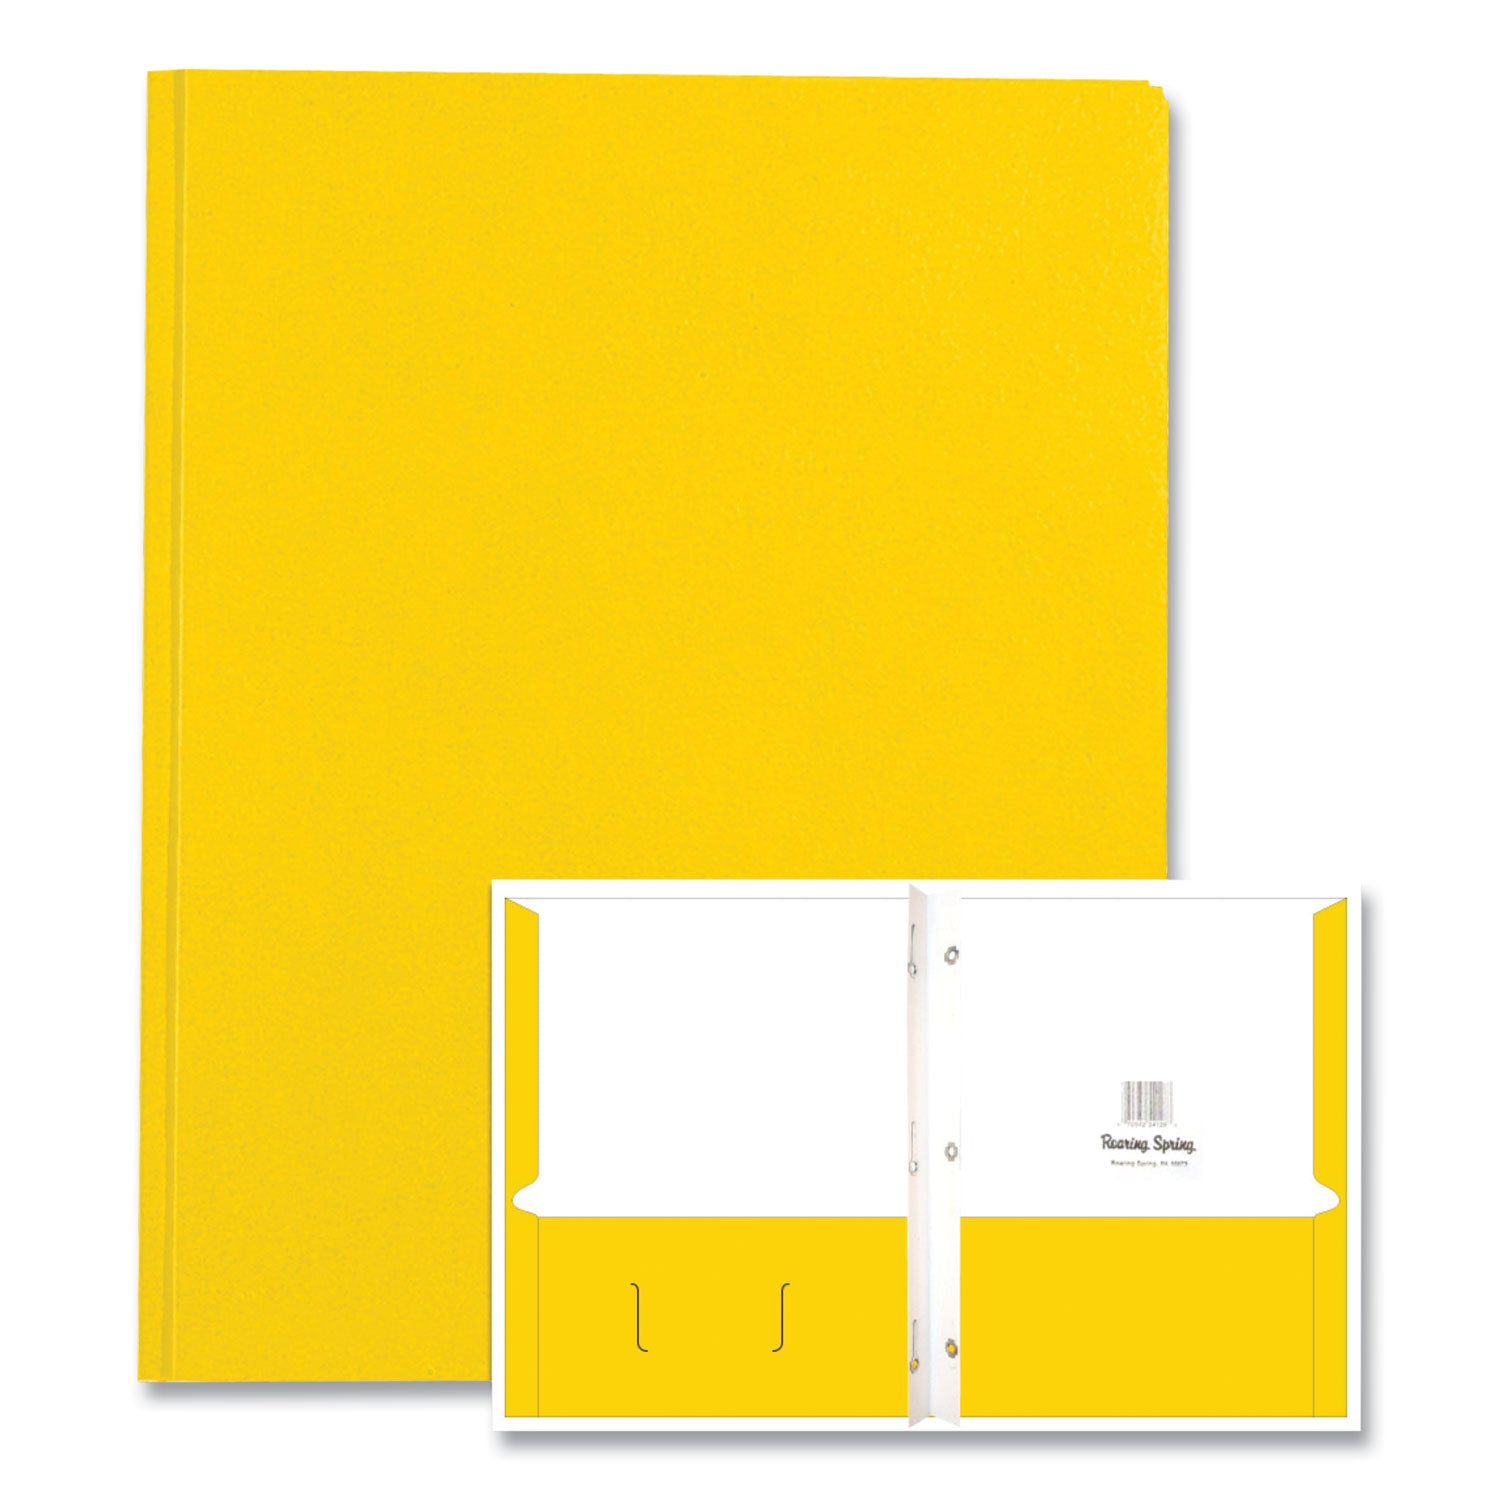 pocket-folder-with-3-fasteners-05-capacity-11-x-85-yellow-25-box-10-boxes-carton-ships-in-4-6-business-days_roa54125cs - 2